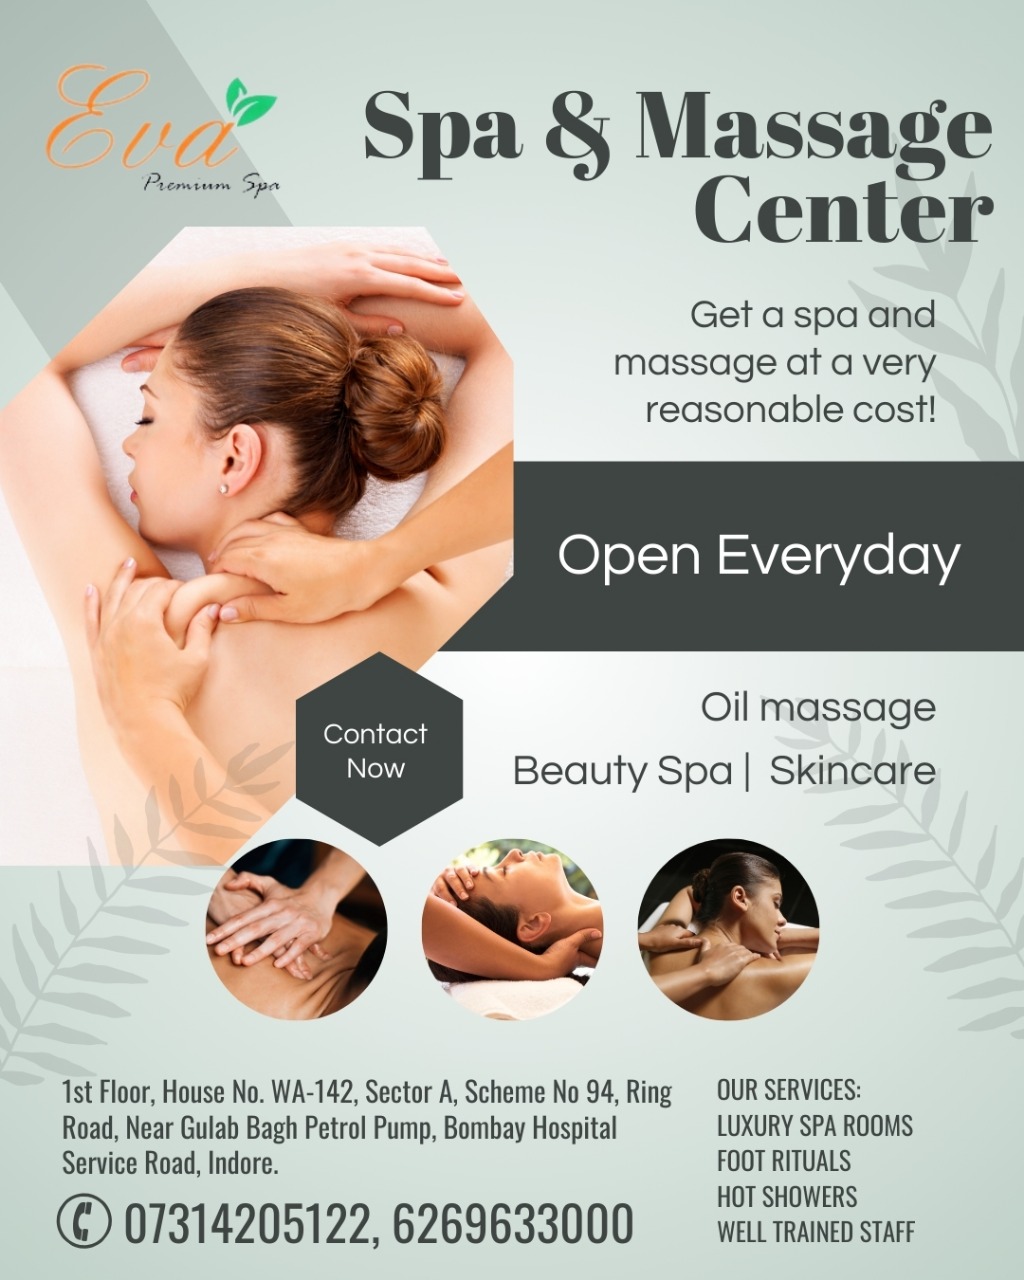 Affordable Spa and Massage Services Near Me Indore